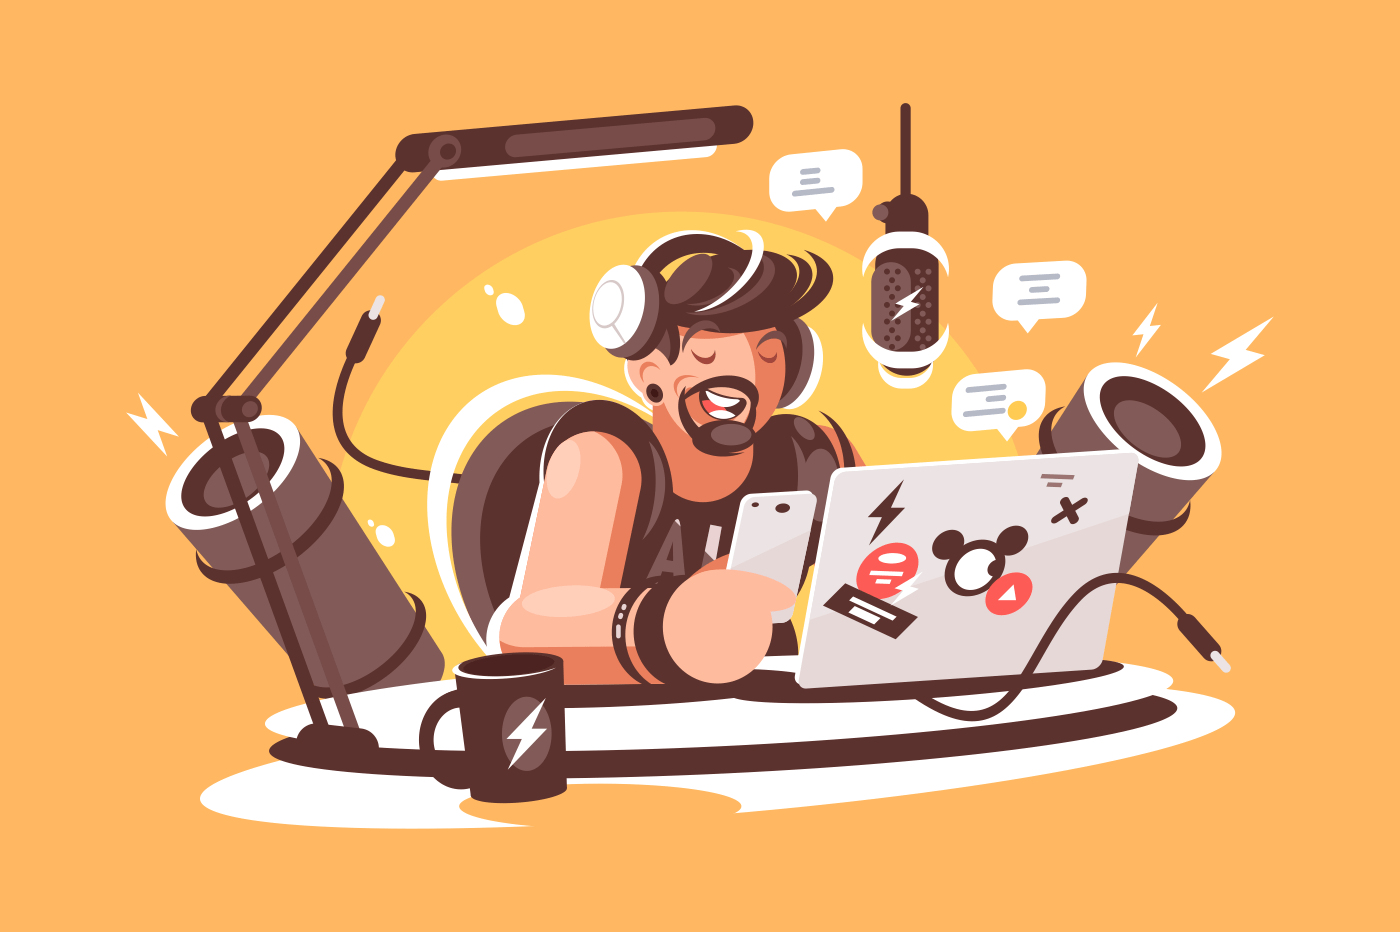 Radio presenter broadcasting in studio. Concept awesome man with beard leads a show in chat, radio, online. Vector illustration.